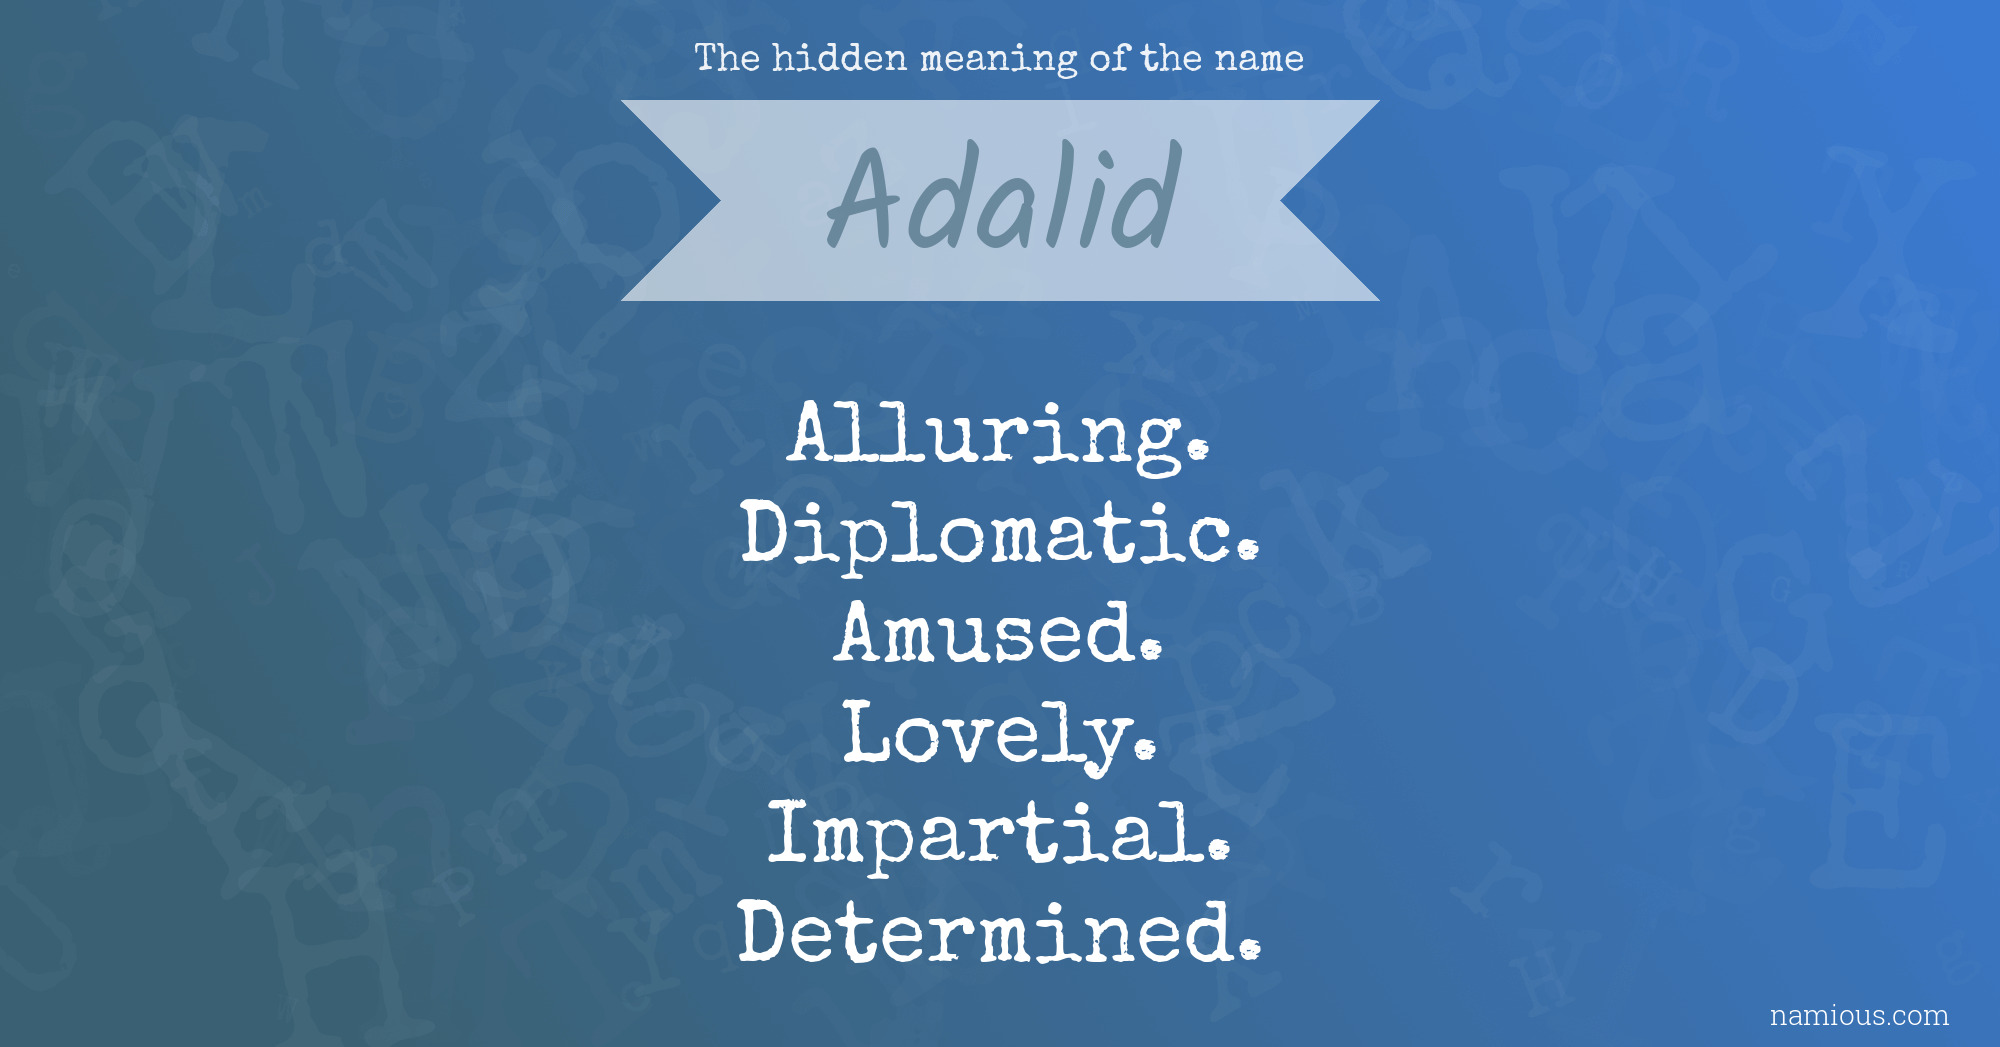 The hidden meaning of the name Adalid